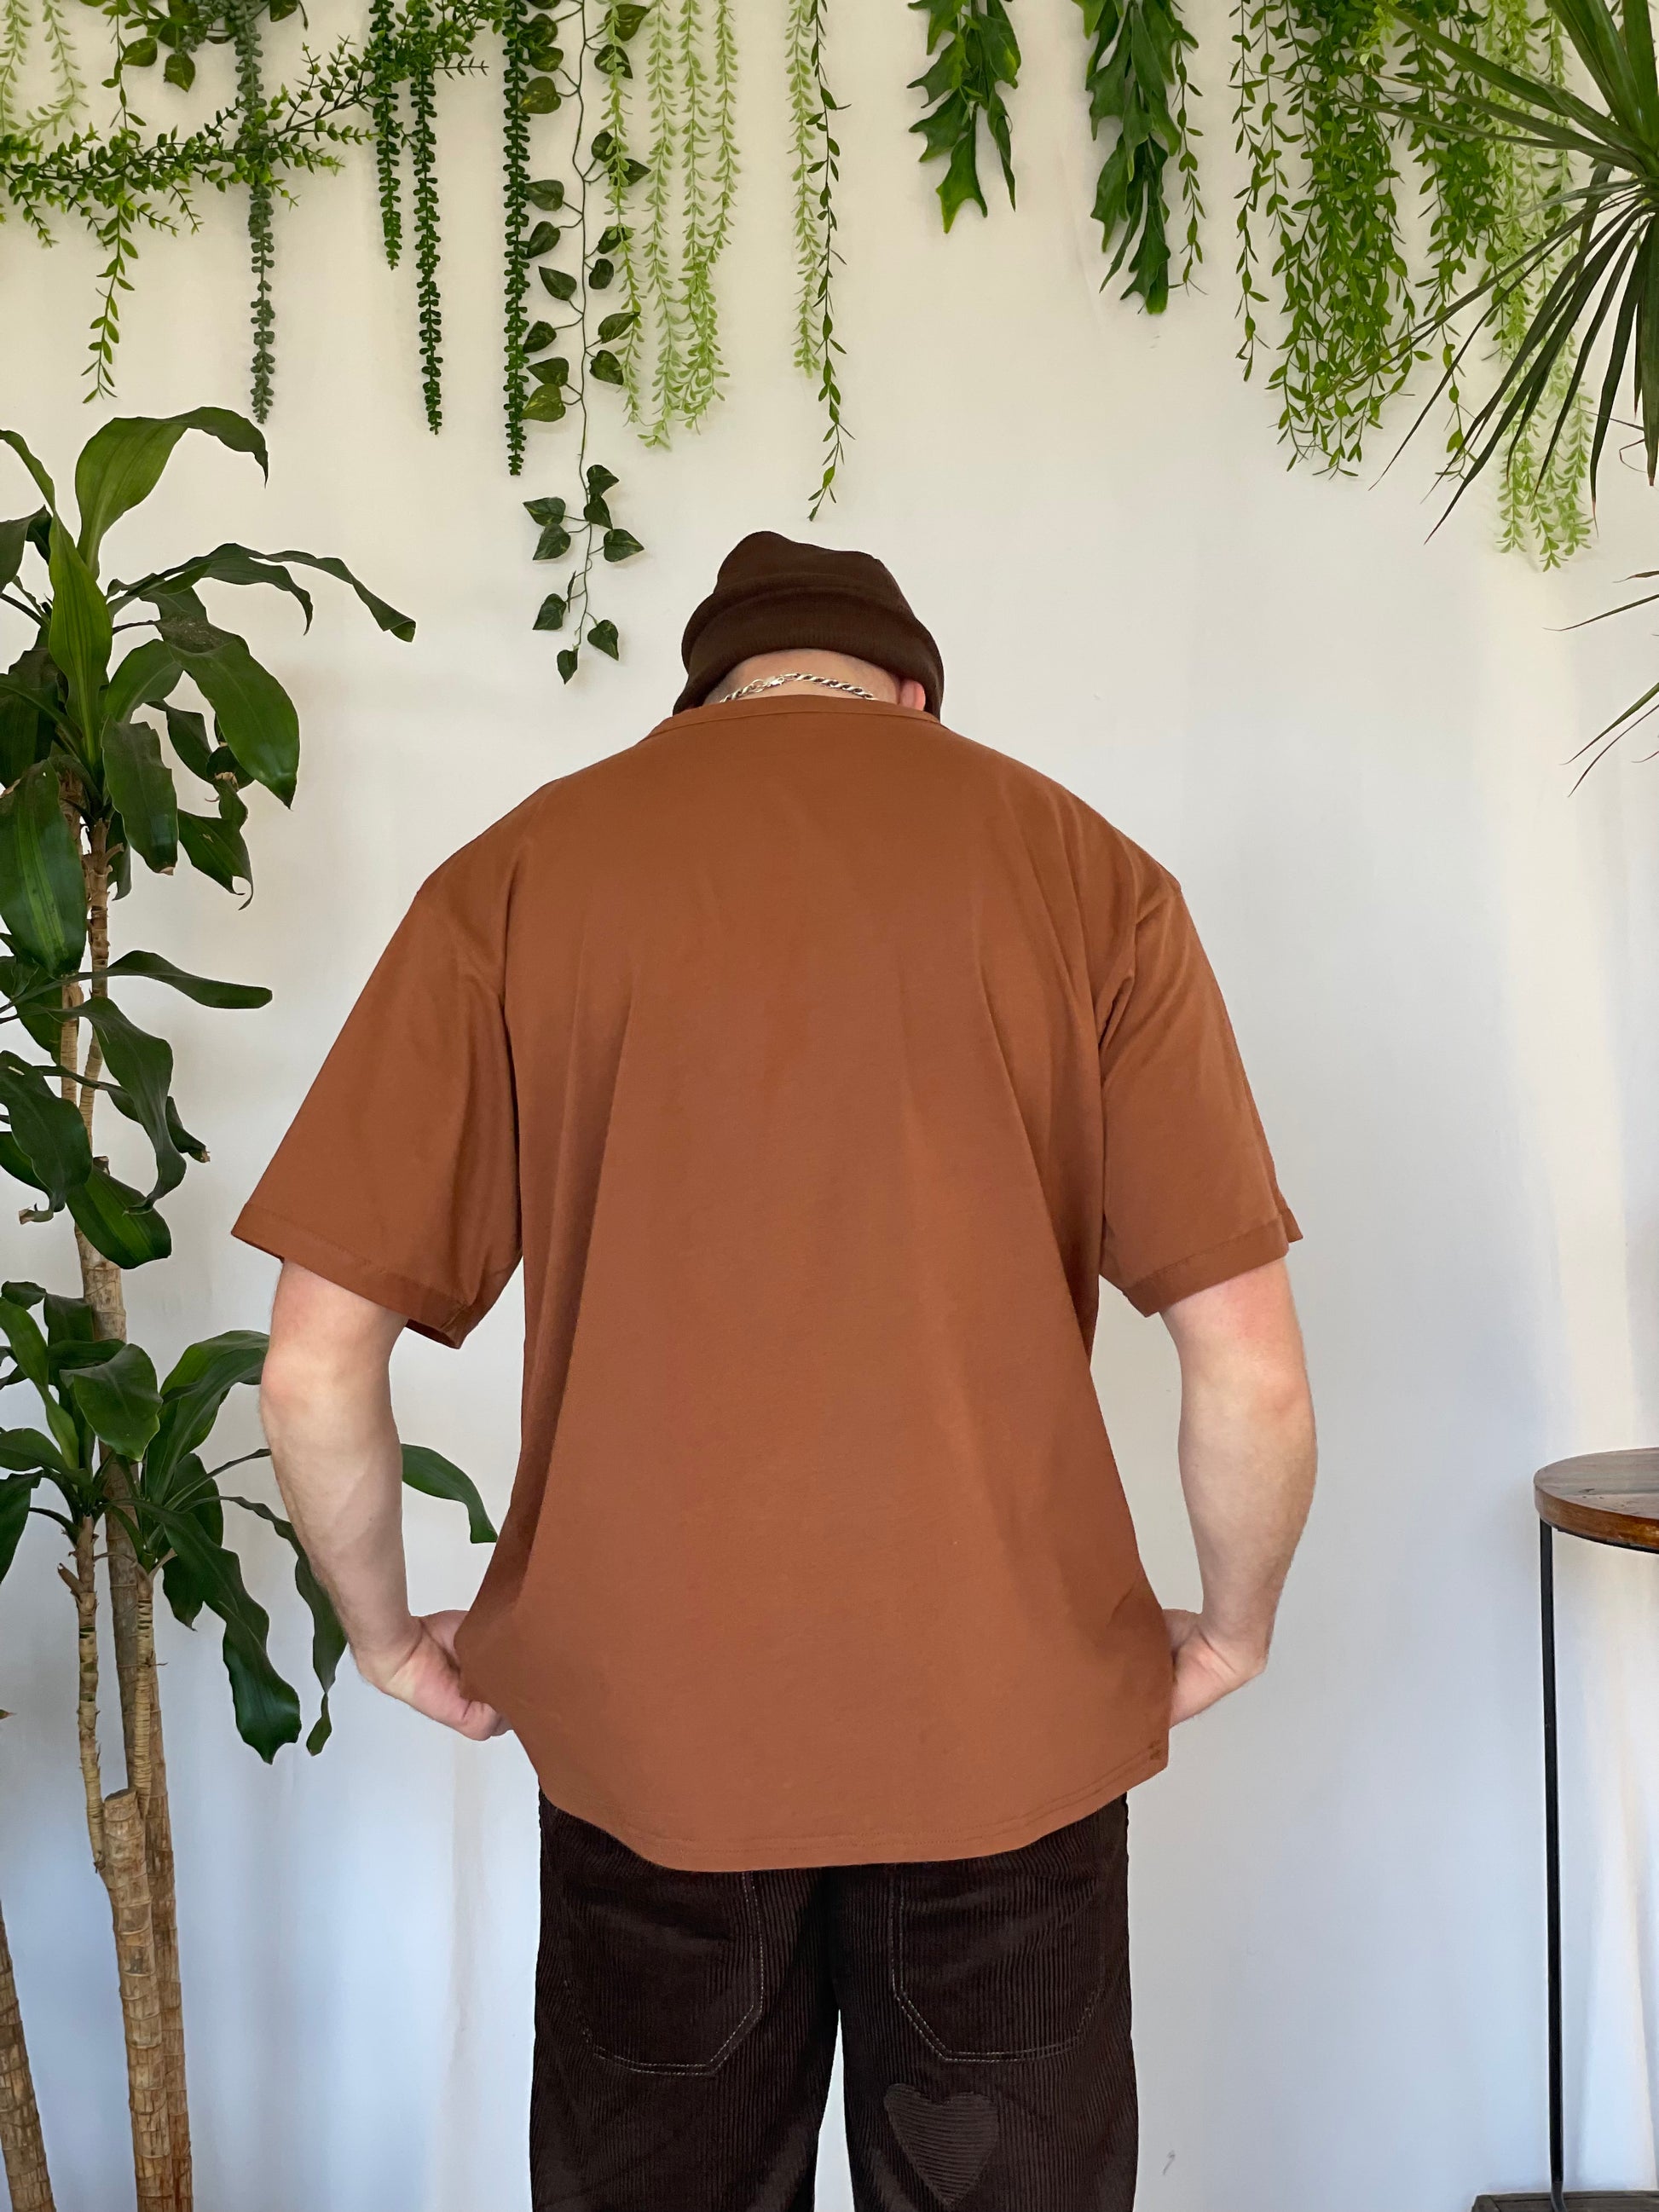 Model stands with back to camera wearing a light brown t-shirt, brown corduroy pants and brown beanie against a white backdrop with plants and hanging foliage.